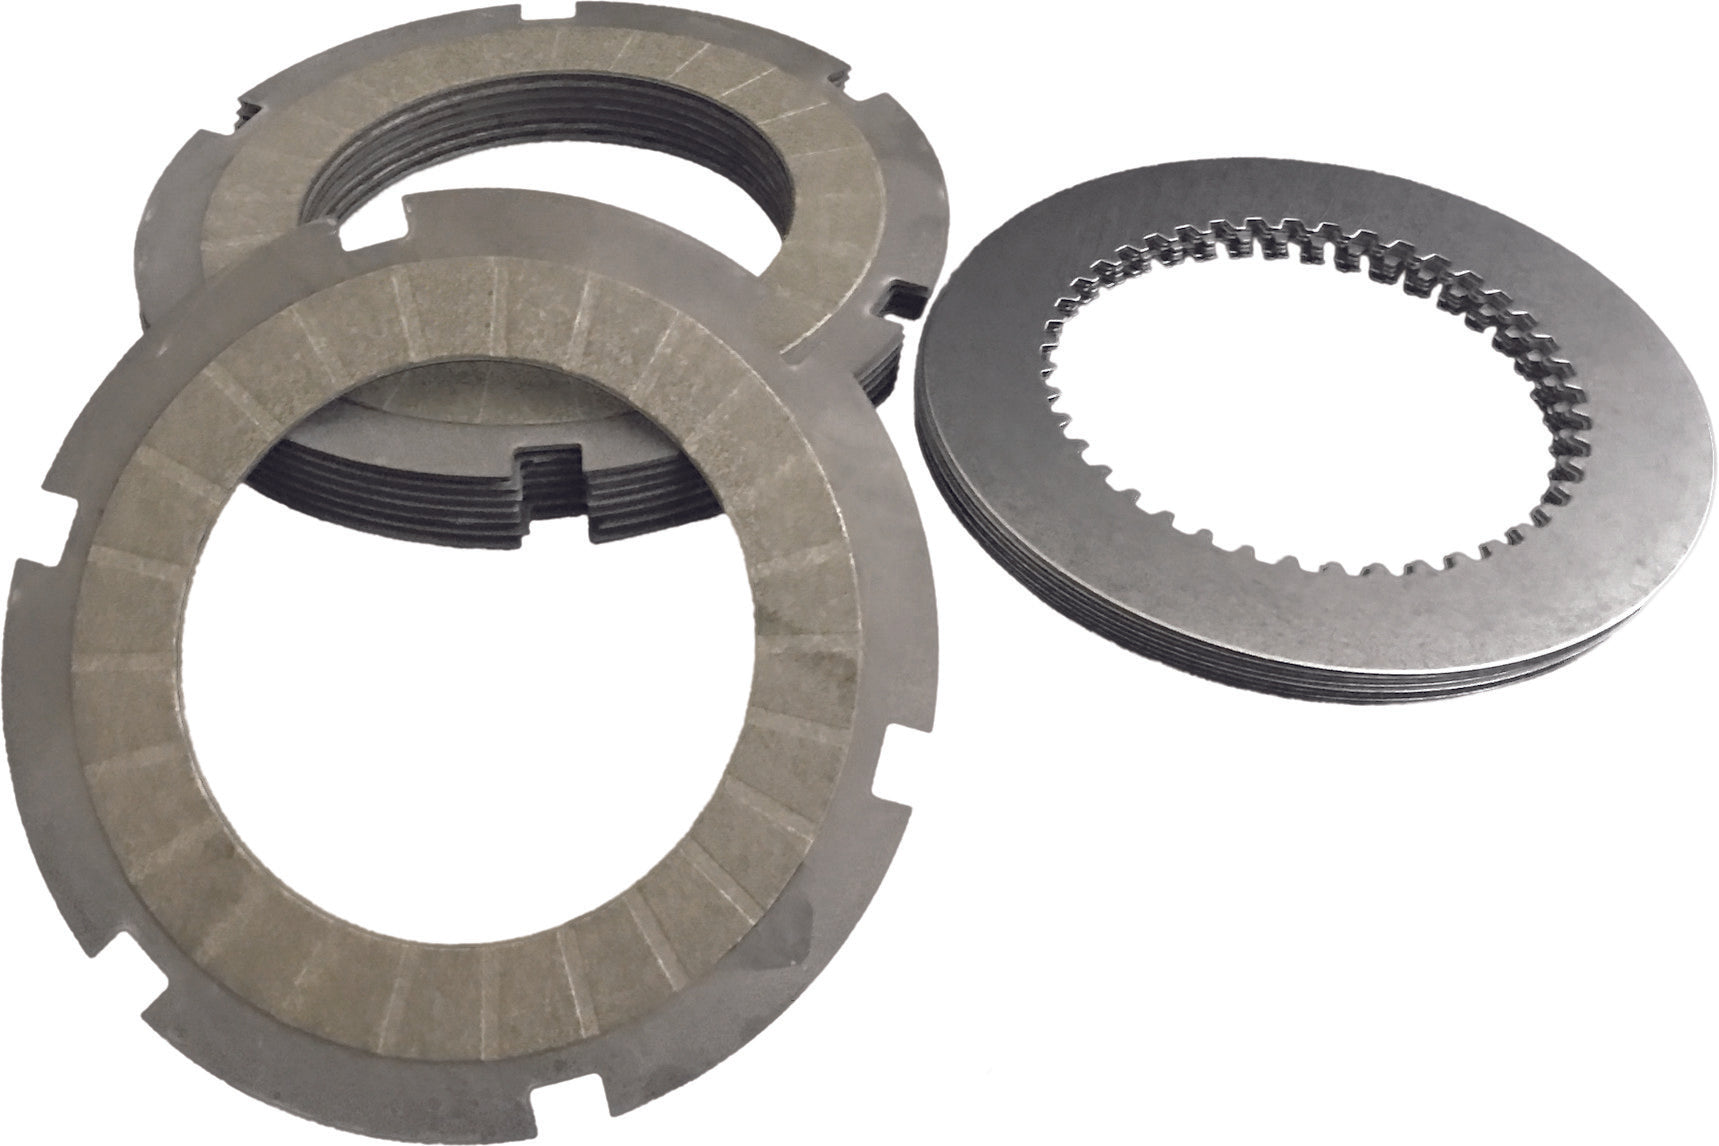 ENERGY ONE, ENERGY ONE E1 CLUTCH KIT FOR RIVERA PRO 36-84 RP-0041